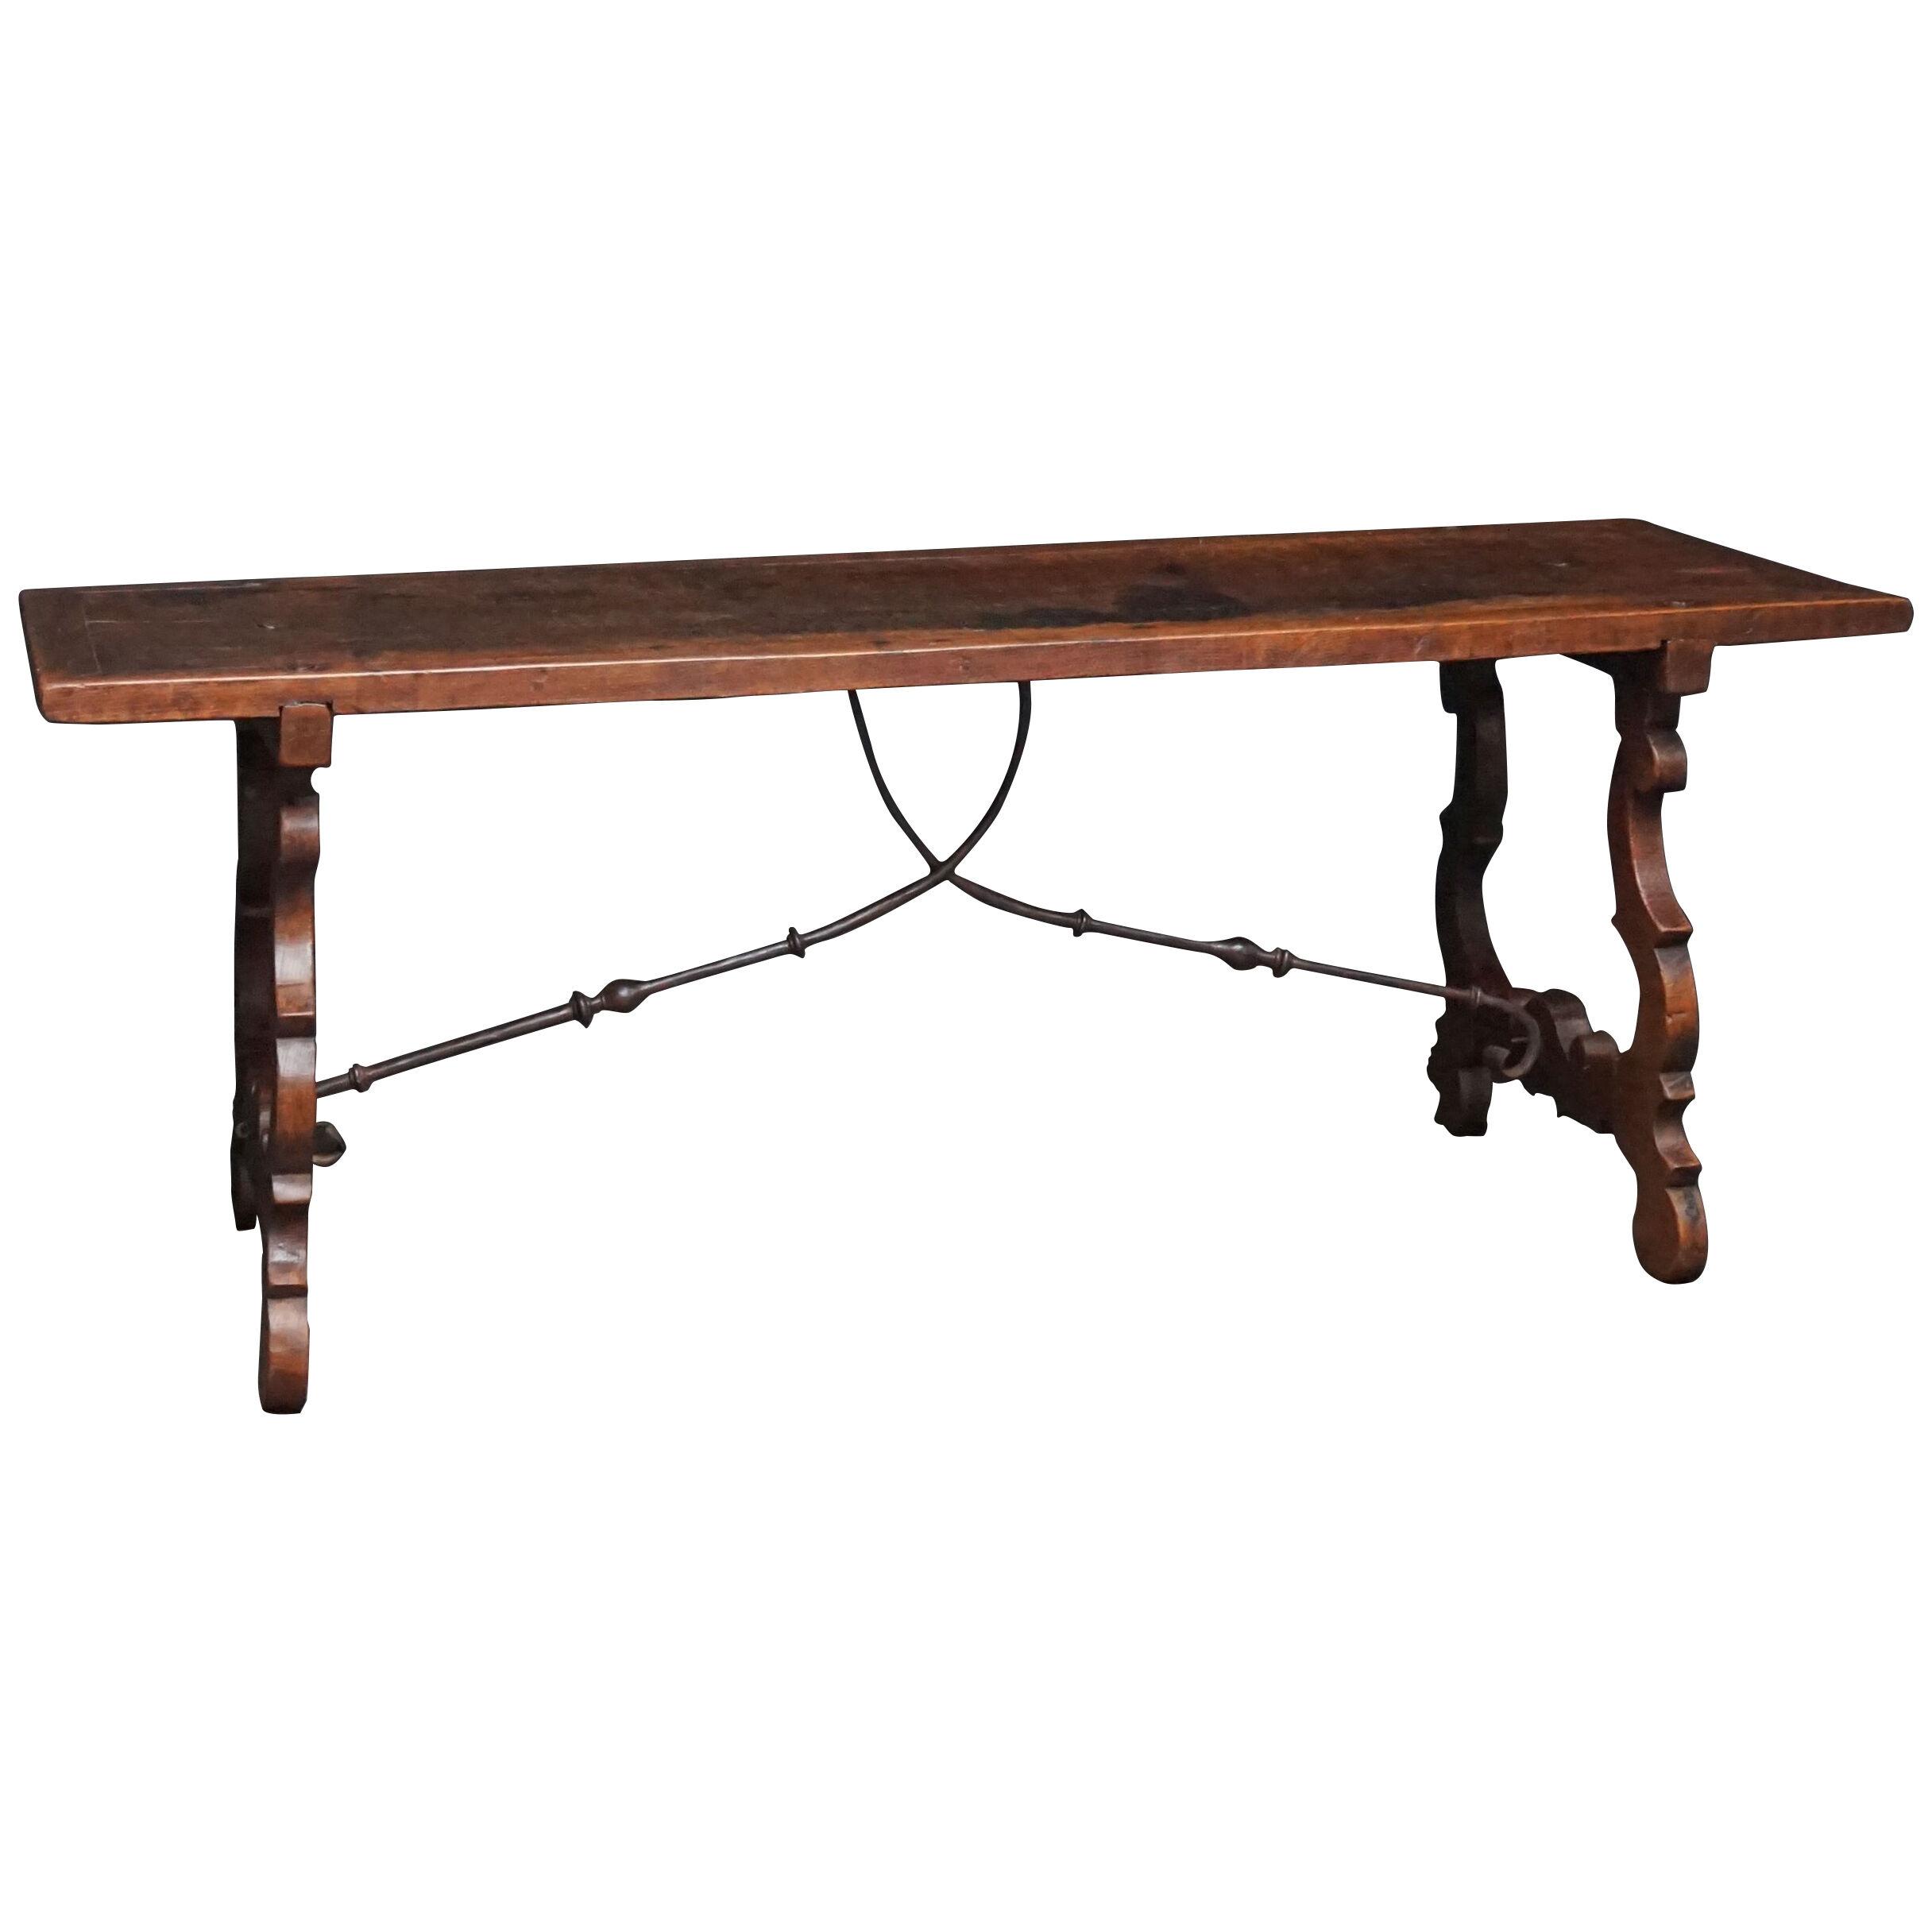 Large 18th Century Spanish Walnut Refectory Kitchen or Dinner Table on Lyre Legs